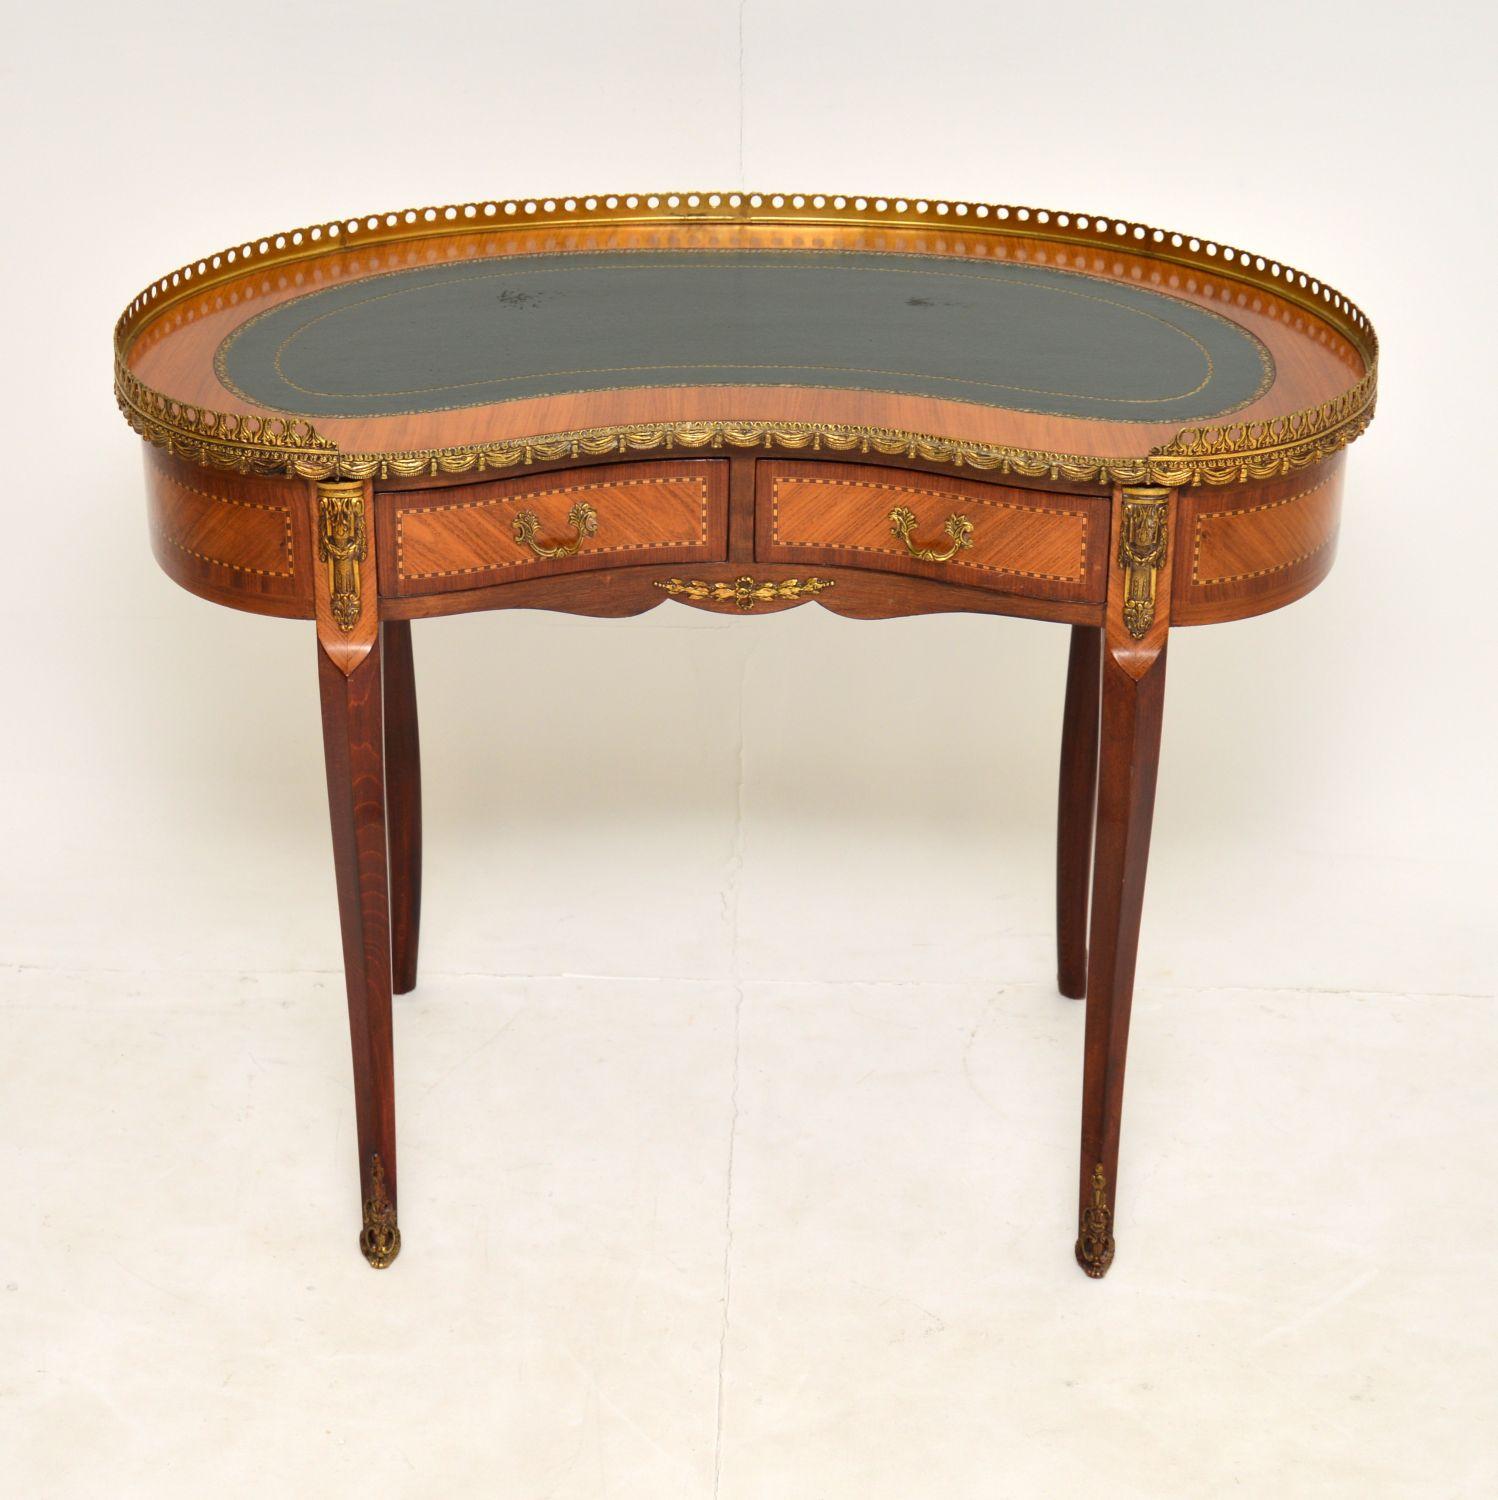 A stunning antique French style kidney shaped desk, dating from around the 1930’s period.

It is of fabulous quality, with a mahogany construction and contrasting veneers of mahogany, Kingwood and satin wood. There are fine gilt bronze mounts